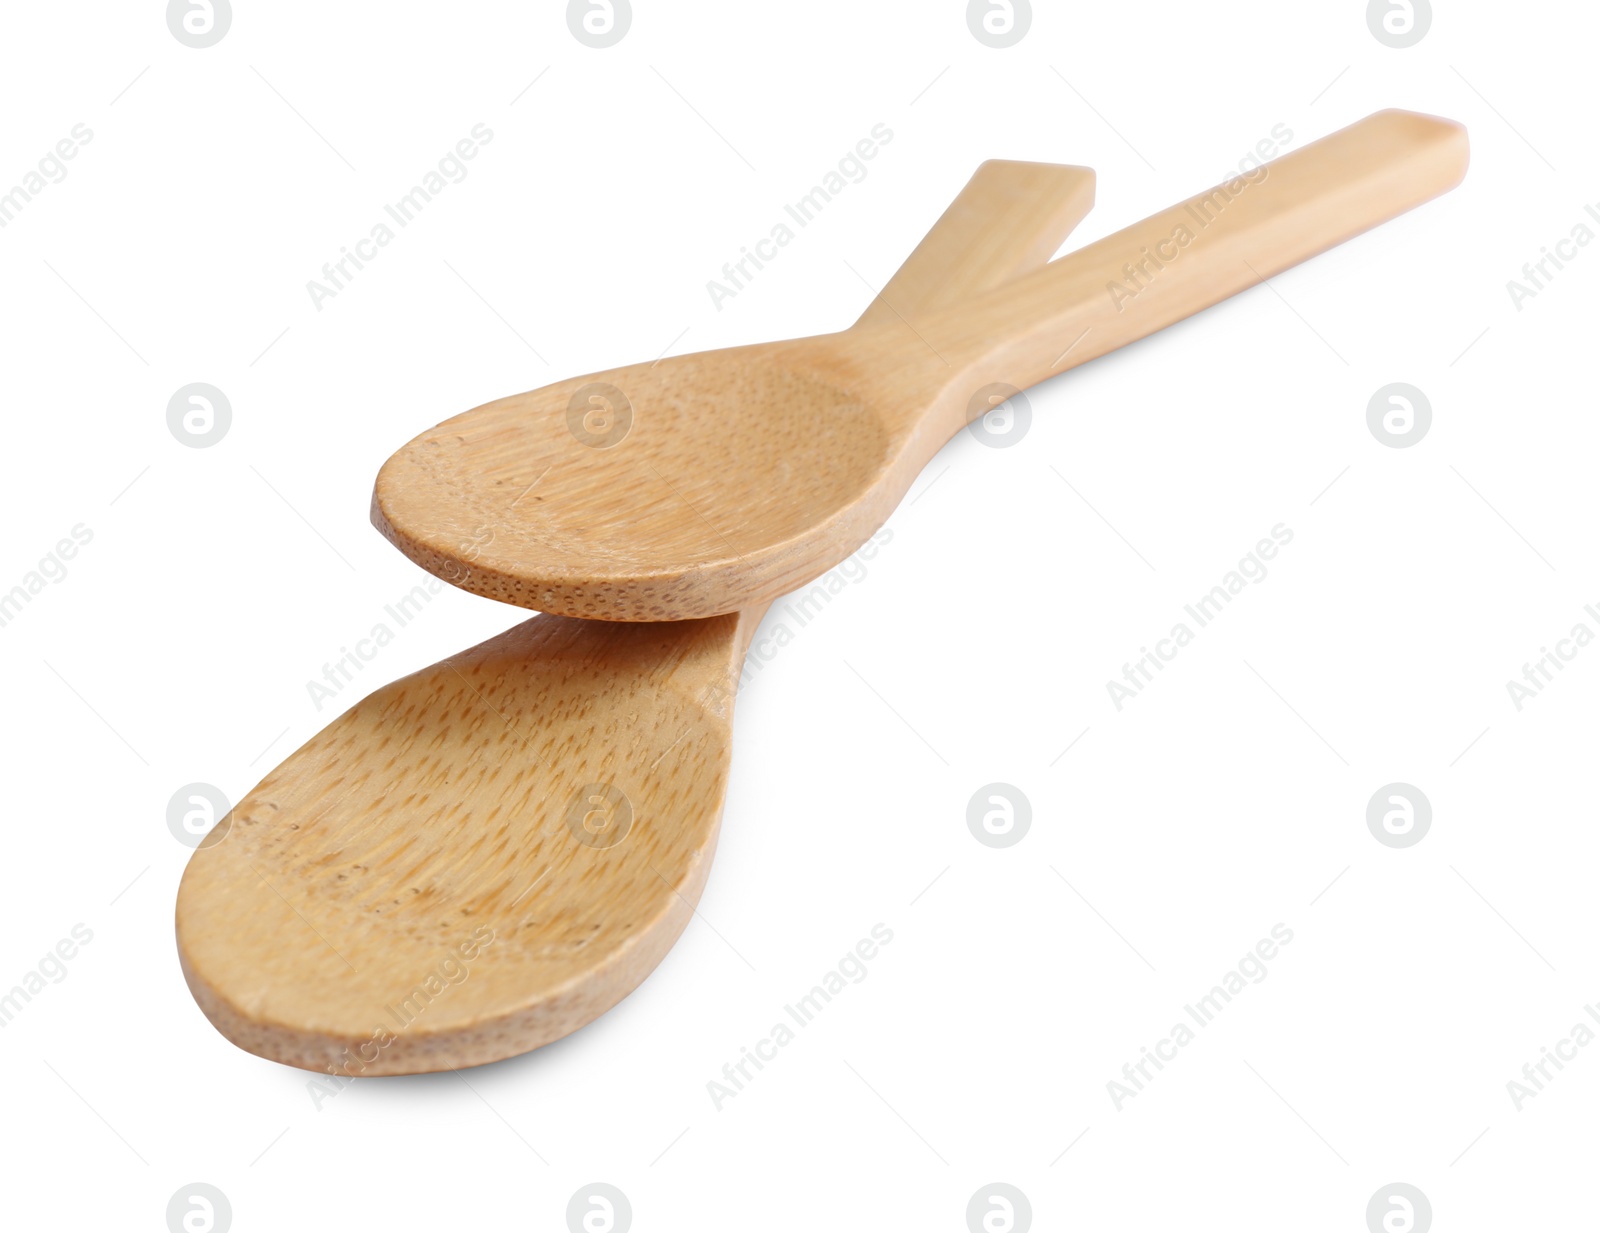 Photo of Two new wooden spoons on white background